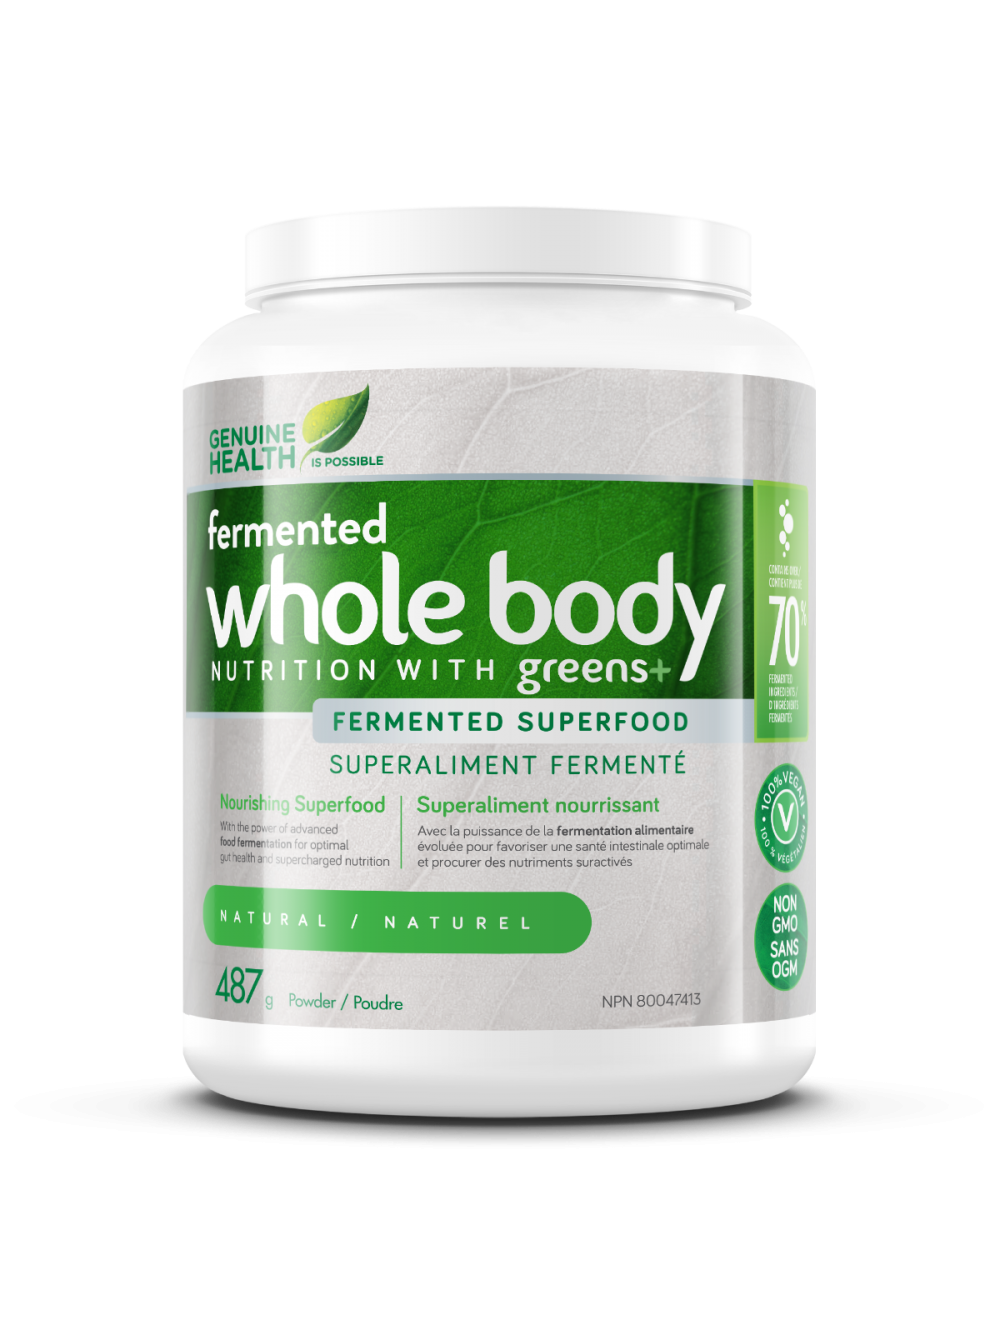 Genuine Health fermented whole body NUTRITION with greens+ natural 487 g